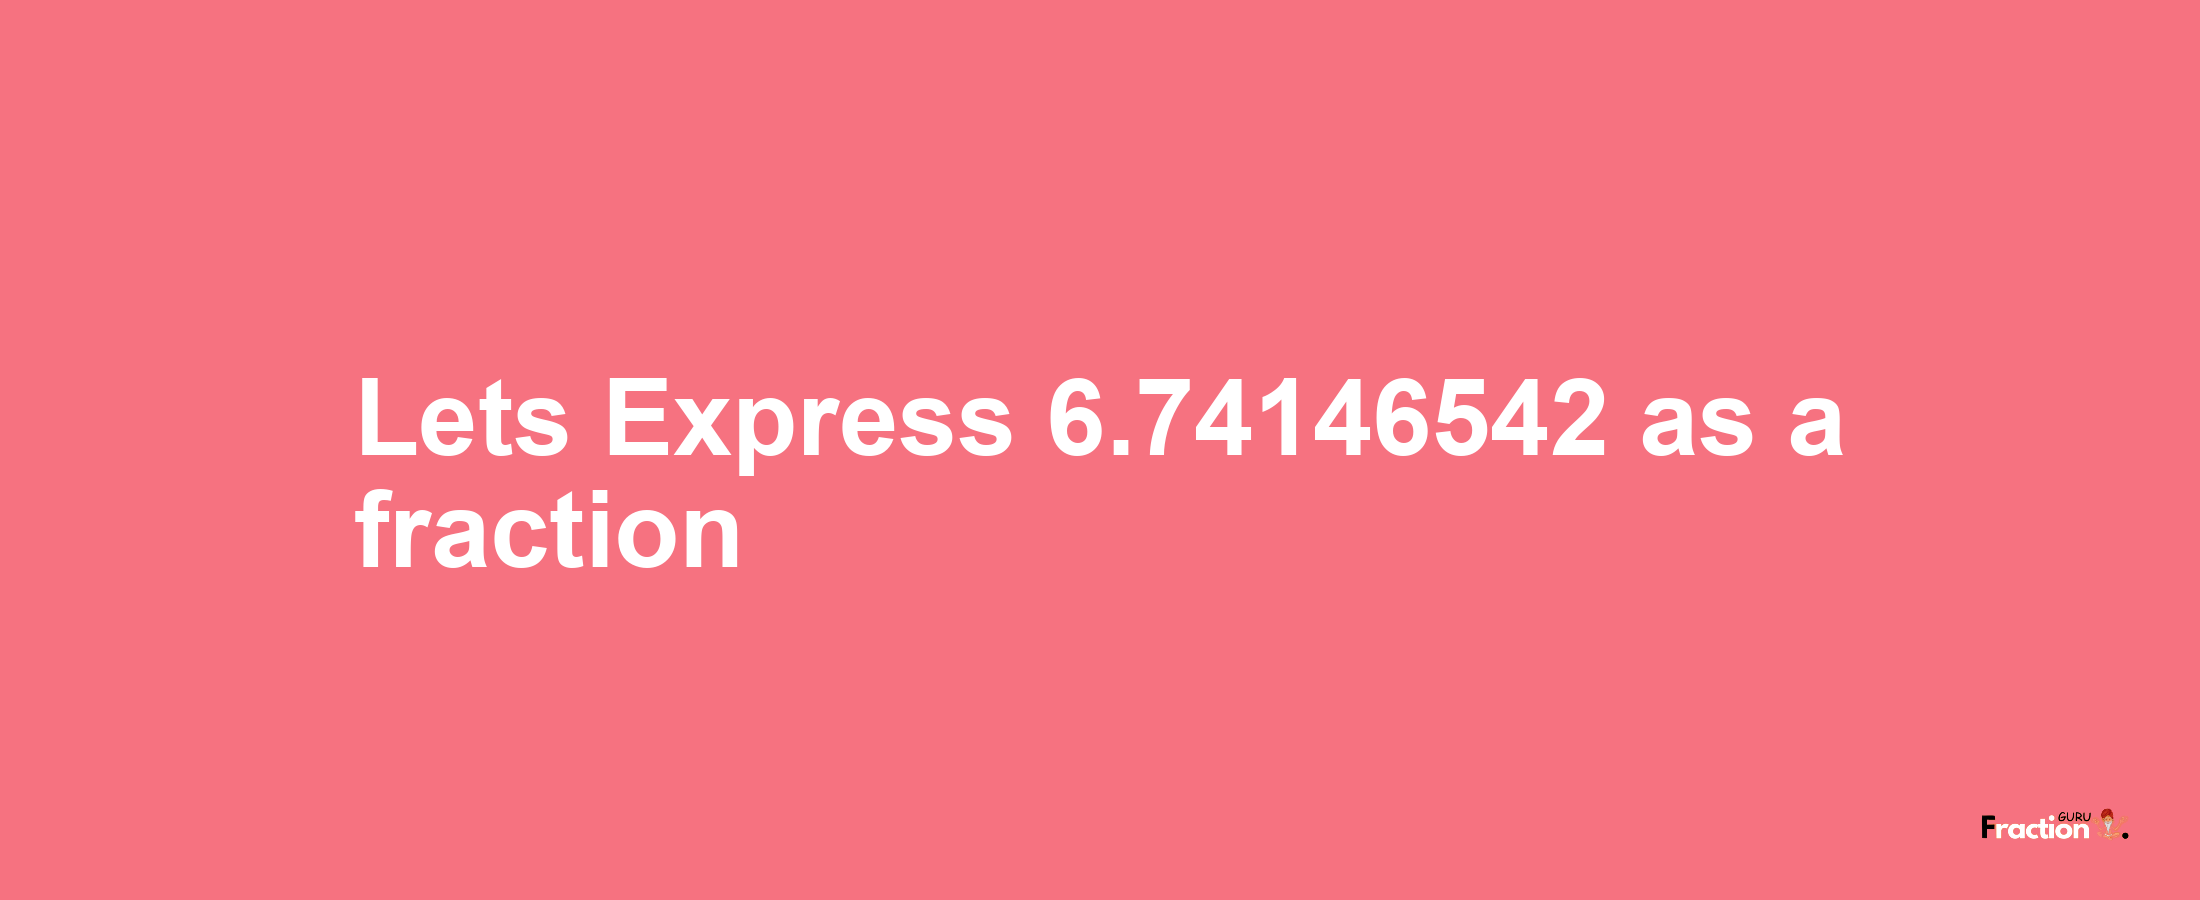 Lets Express 6.74146542 as afraction